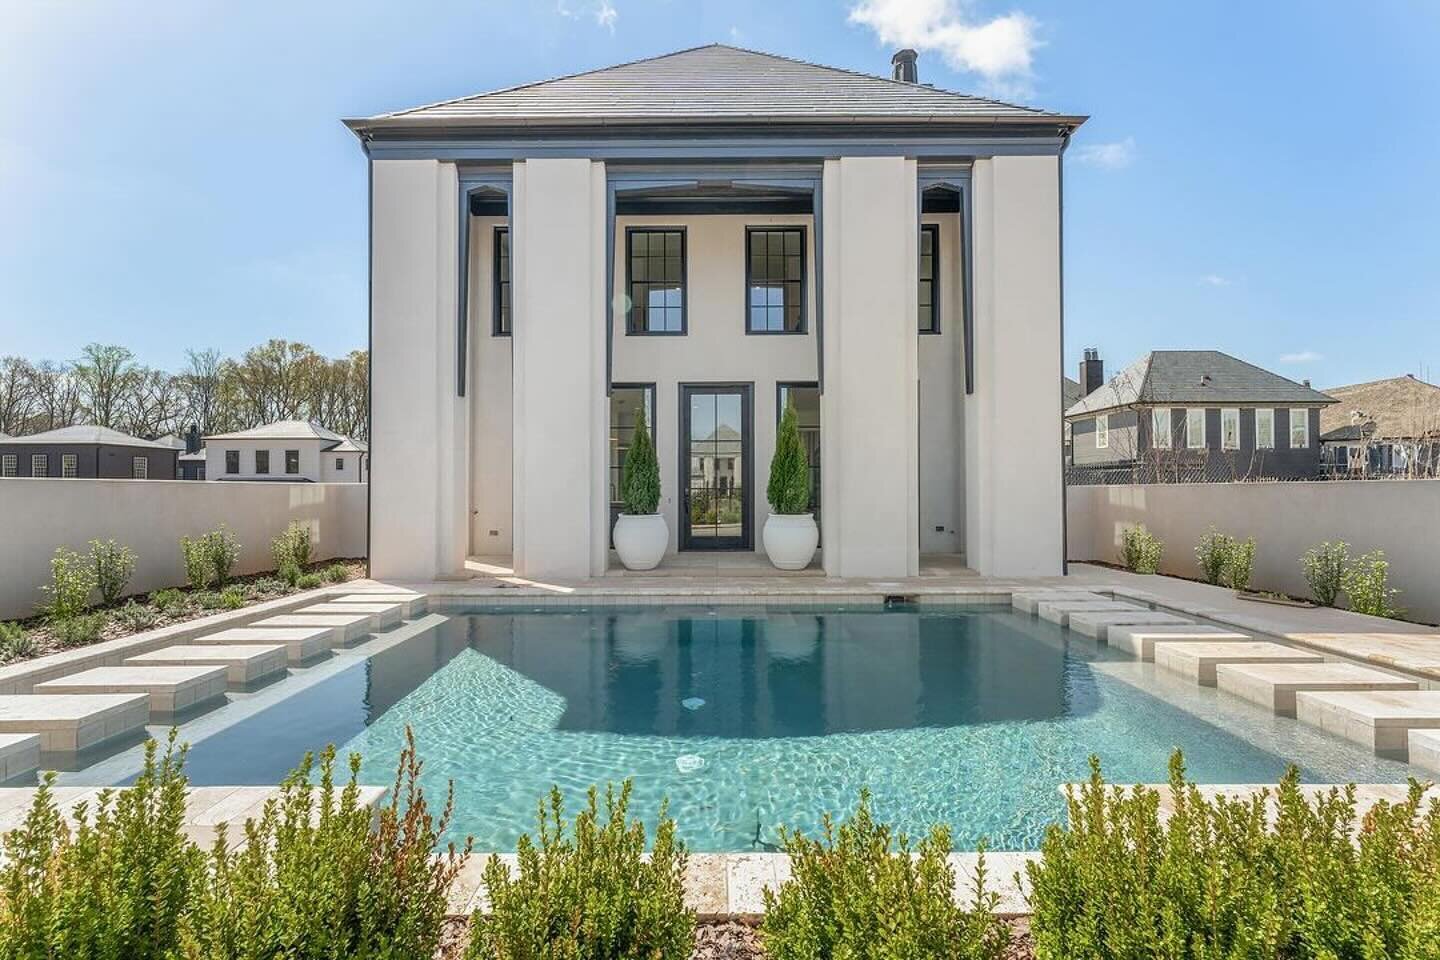 Latest on the Great Lawn, where glamour makes a comeback, contrast reigns, and sleek detailing complements a memory of Hollywood Regency precedent.